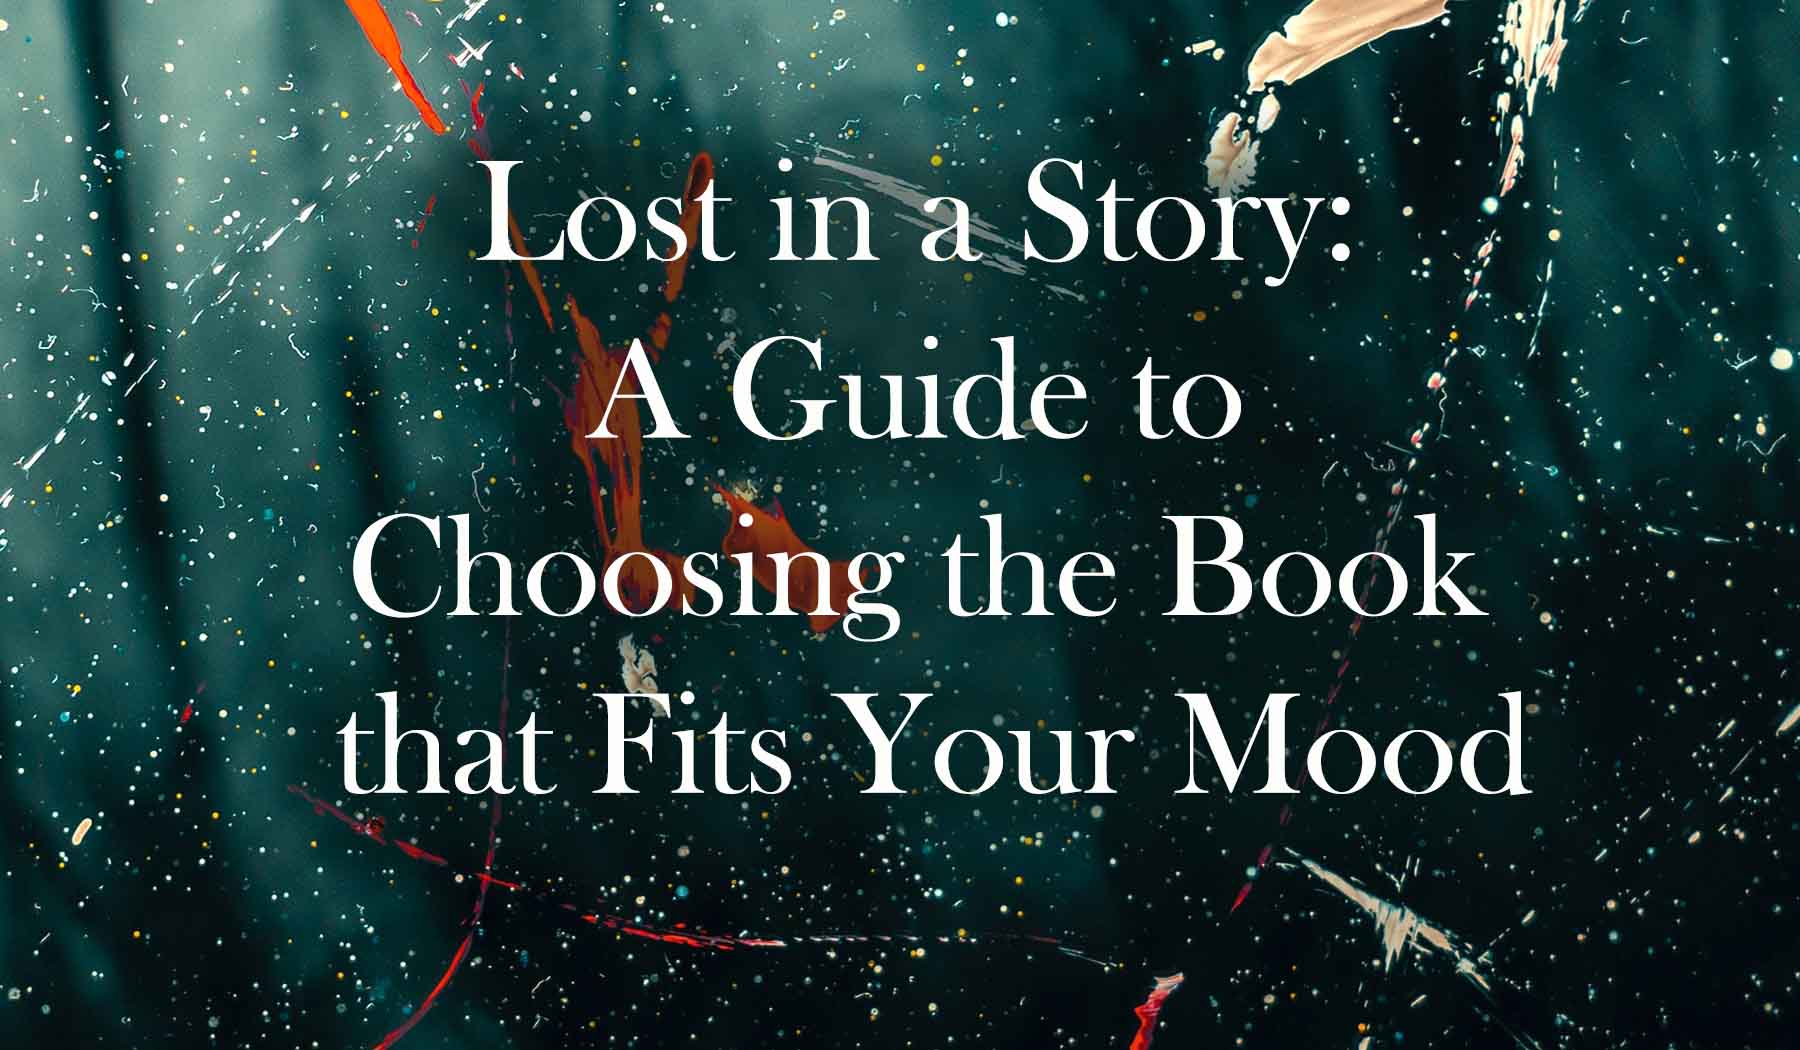 A Guide to Choosing the Book that Fits Your Mood